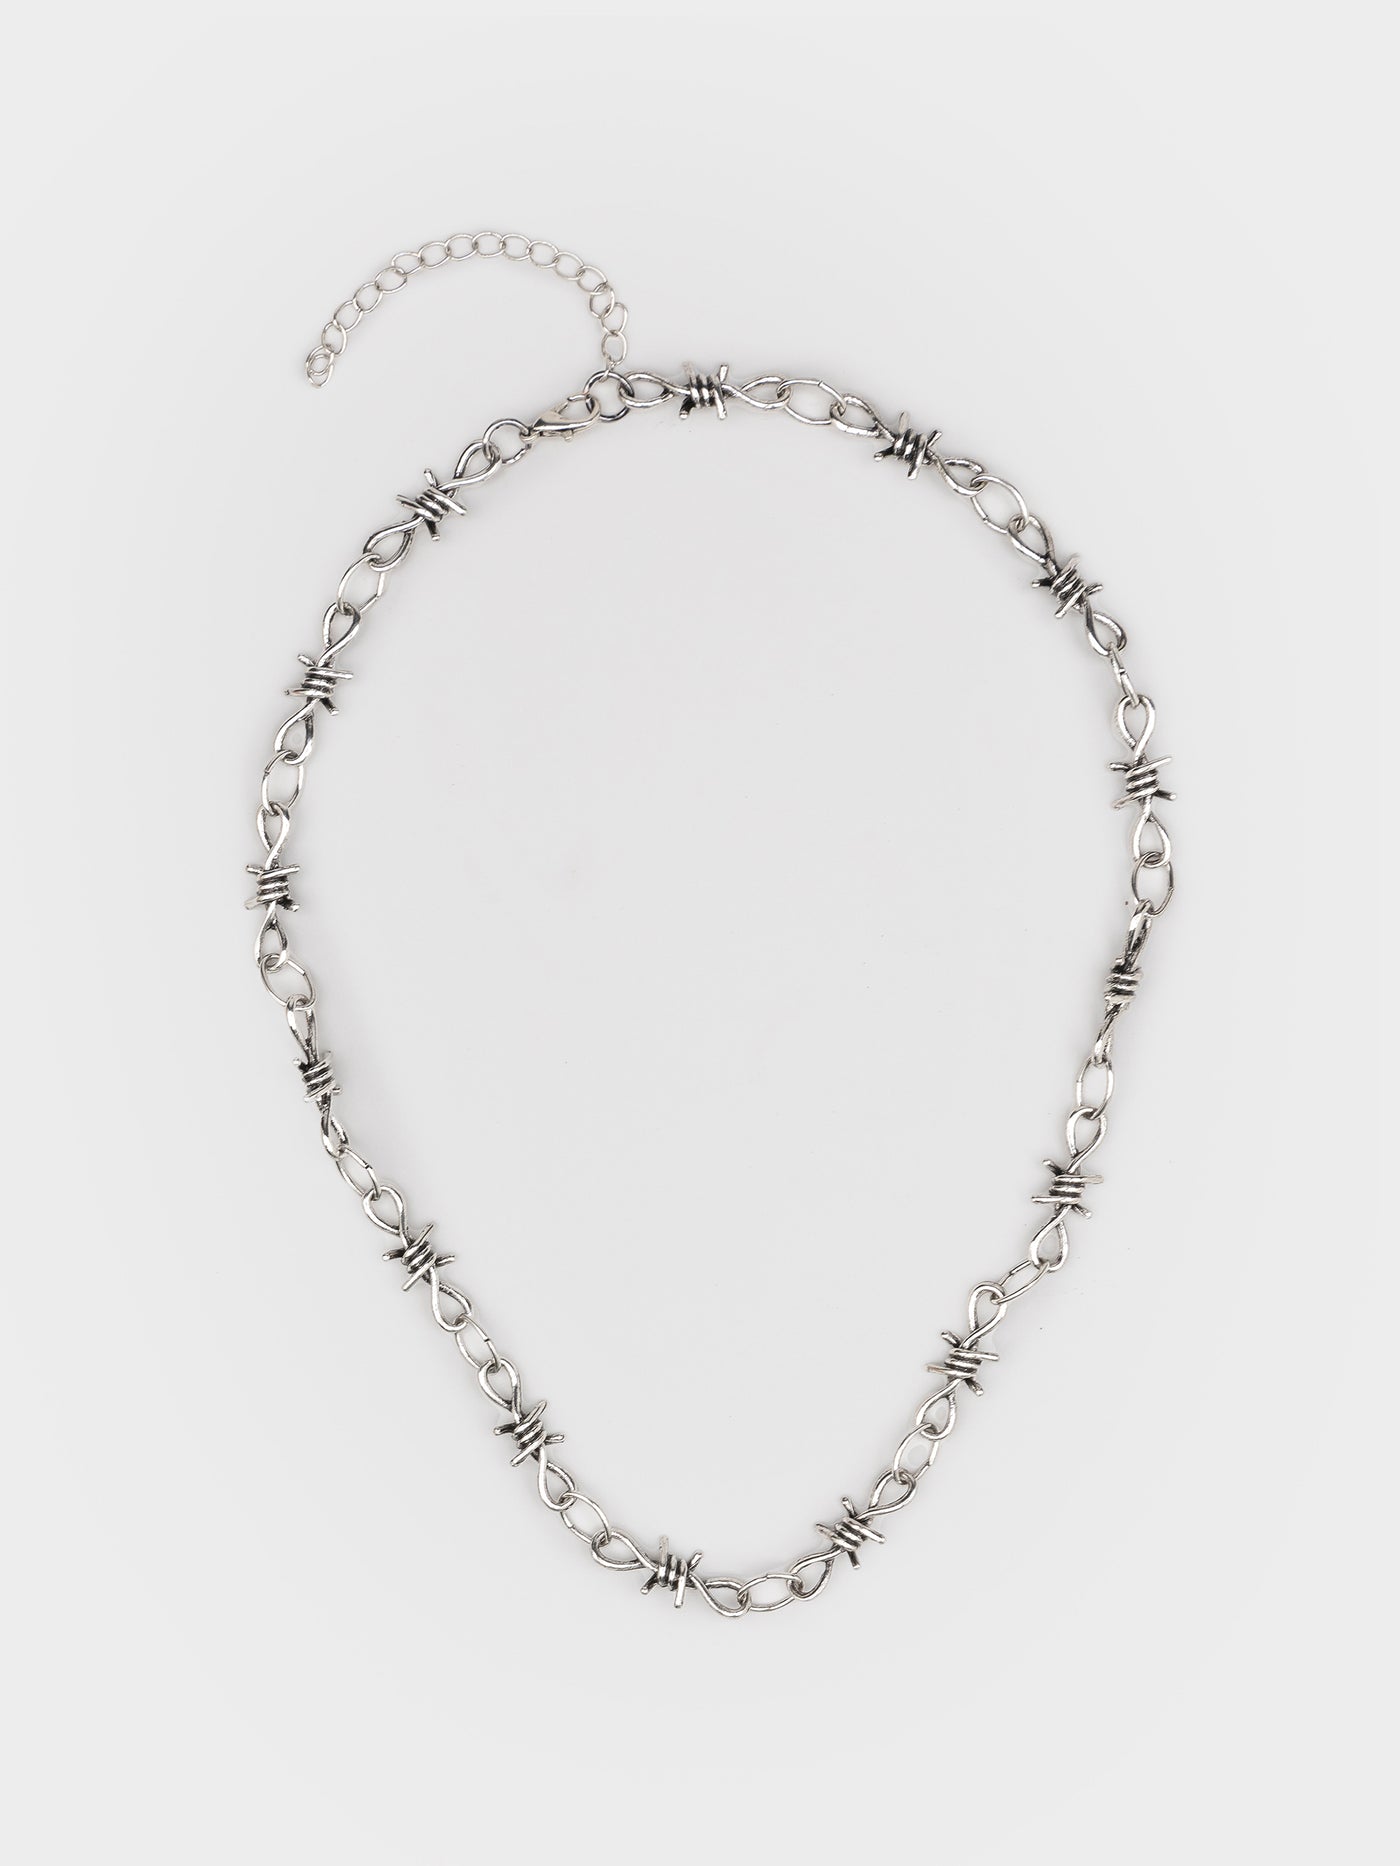 Crown Of Thorns Silver Necklace Set